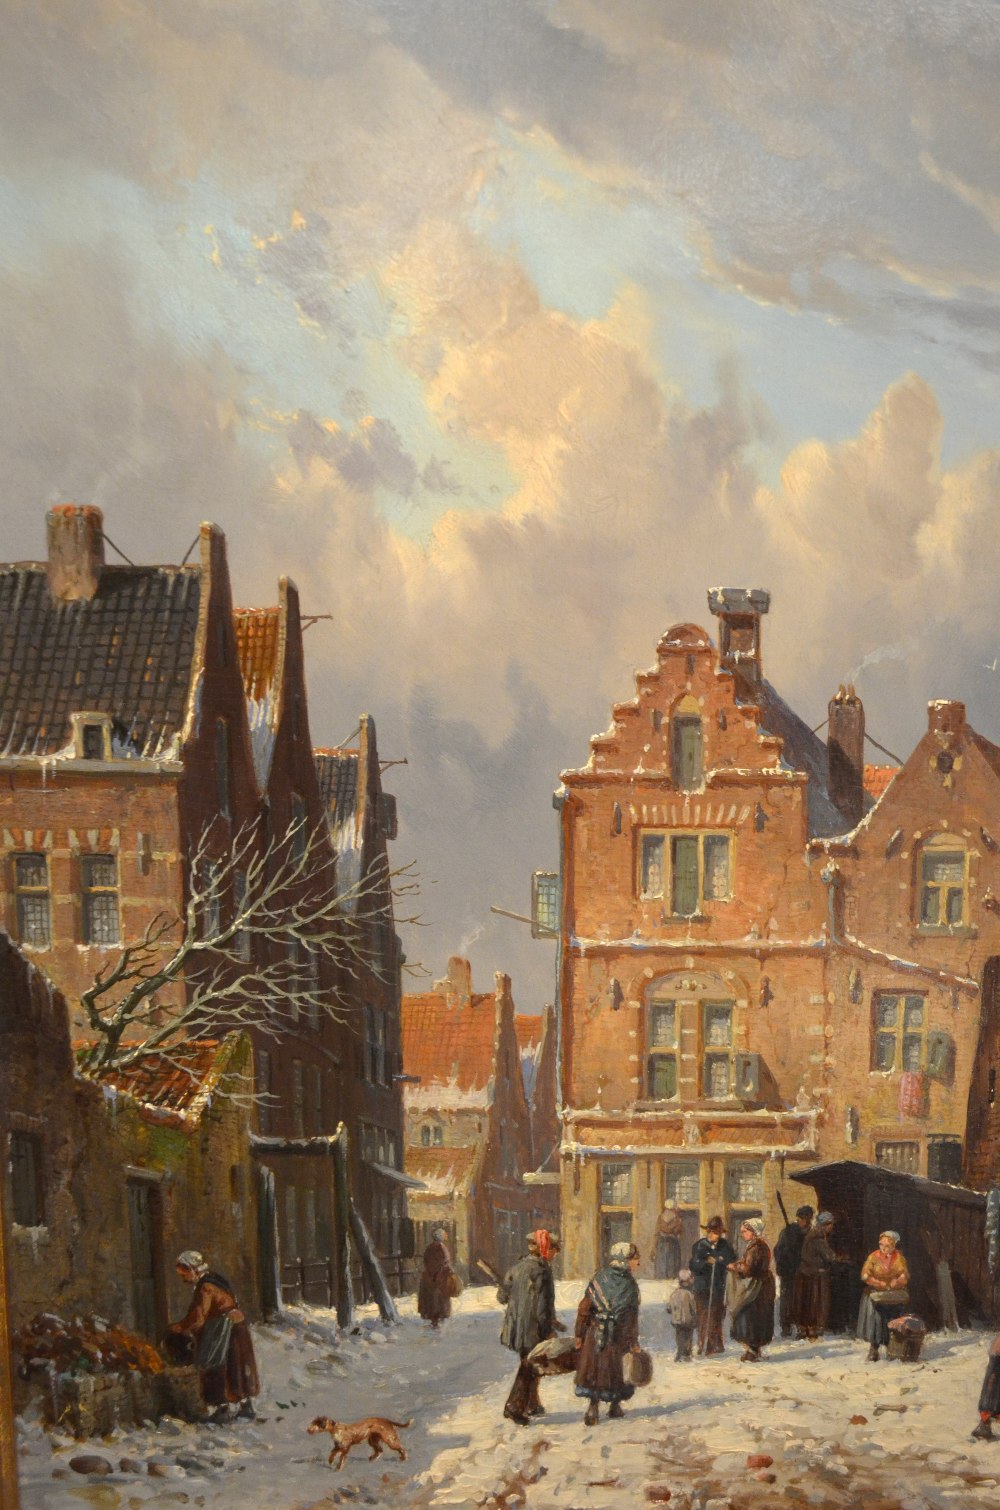 Adrianus Eversen (1818-1897) - Dutch winter town scene with figures in a snowy street, signed